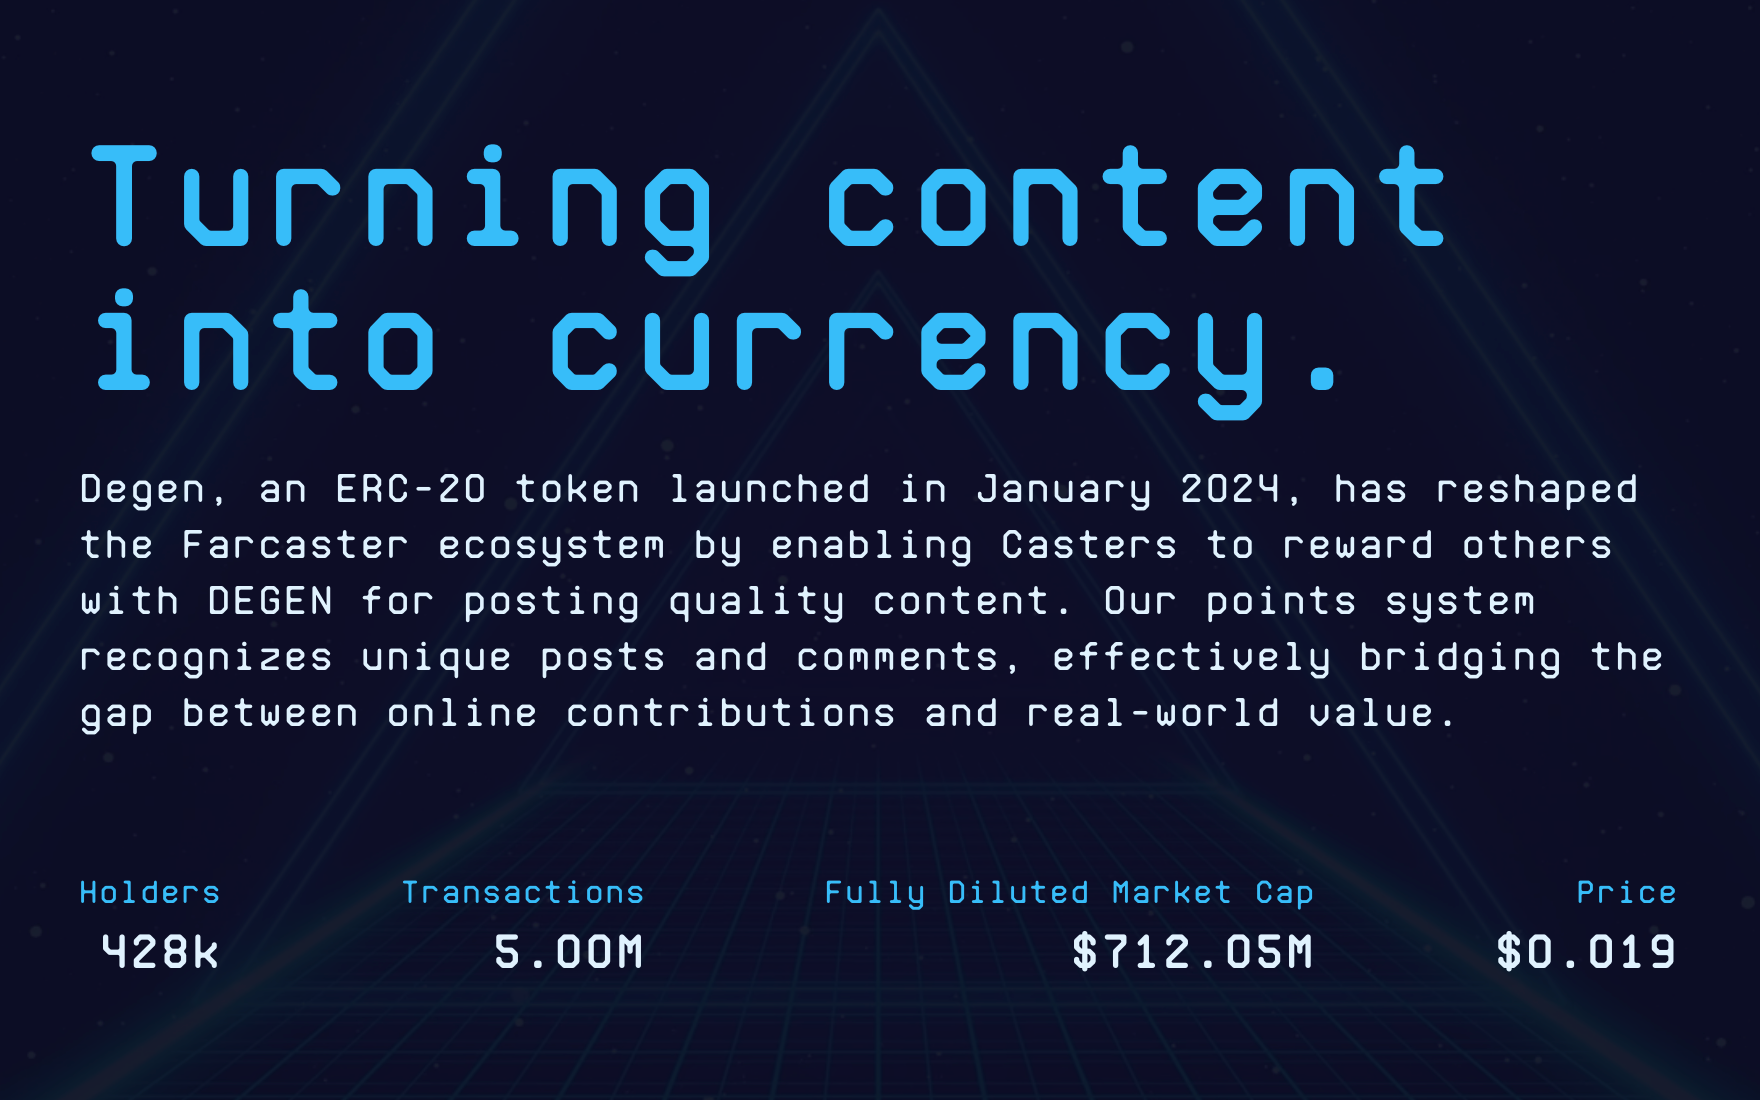 A screen shot from degen.tips that says "Turning content into currency."